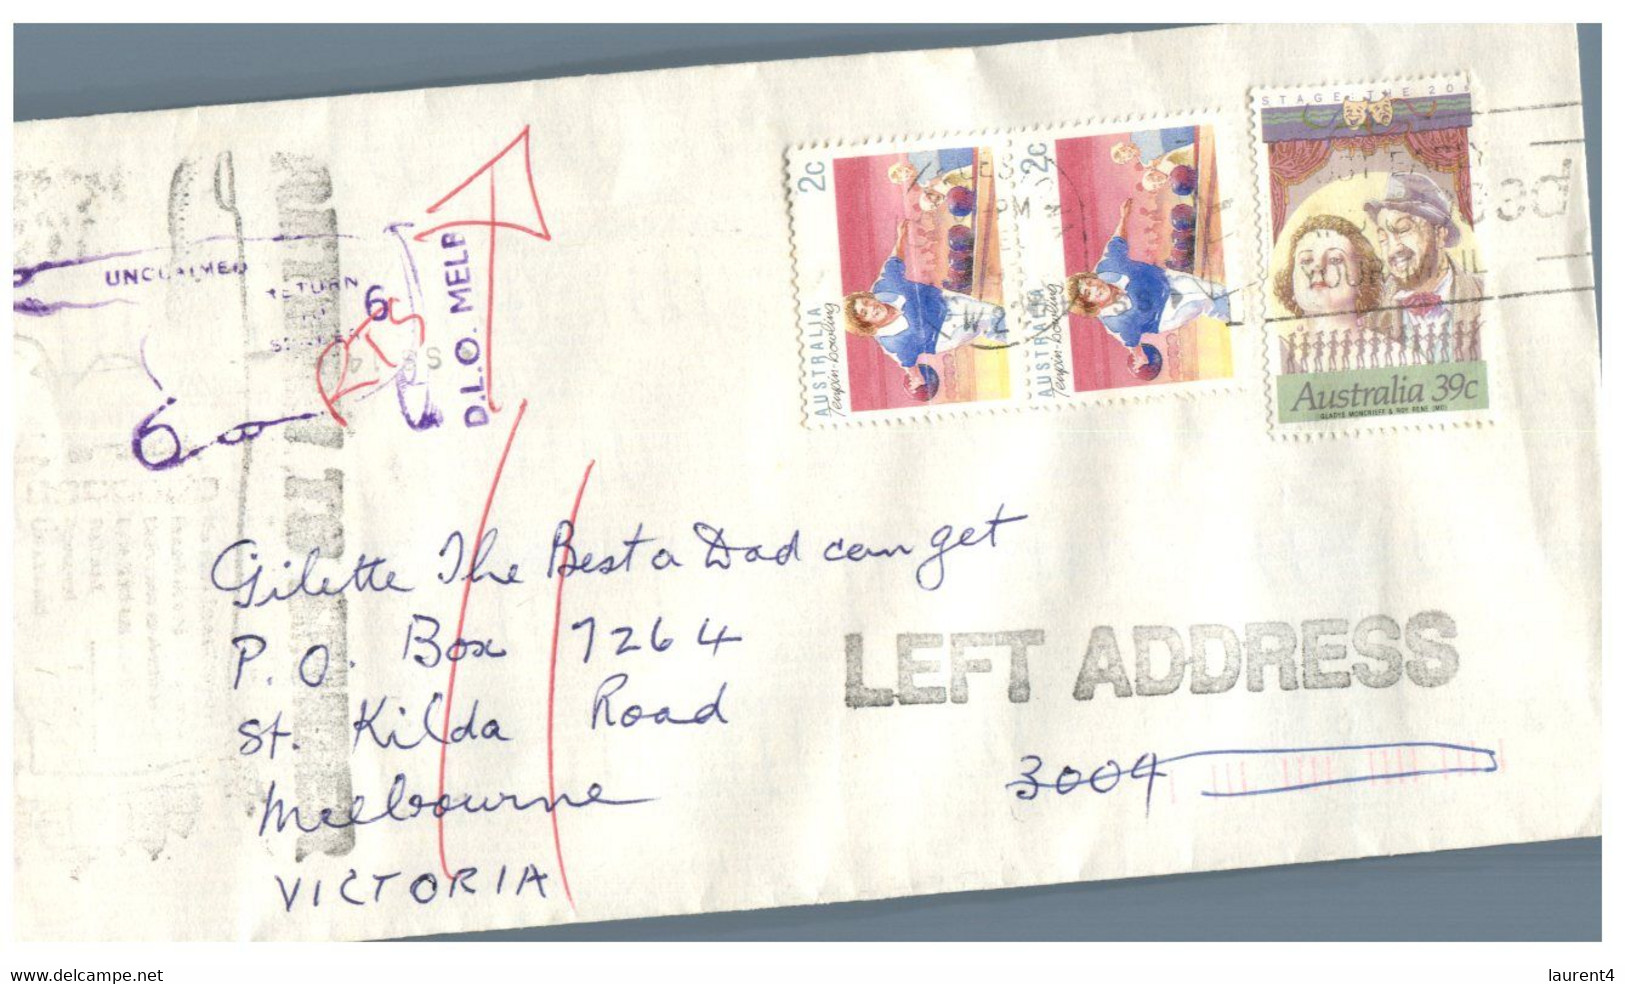 (JJ 14) Letter Posted To Victoria - RTS - Left Address - DLO Melbourne (Highly UNUSUAL / Open, Checked By Post Office) - Errors, Freaks & Oddities (EFO)